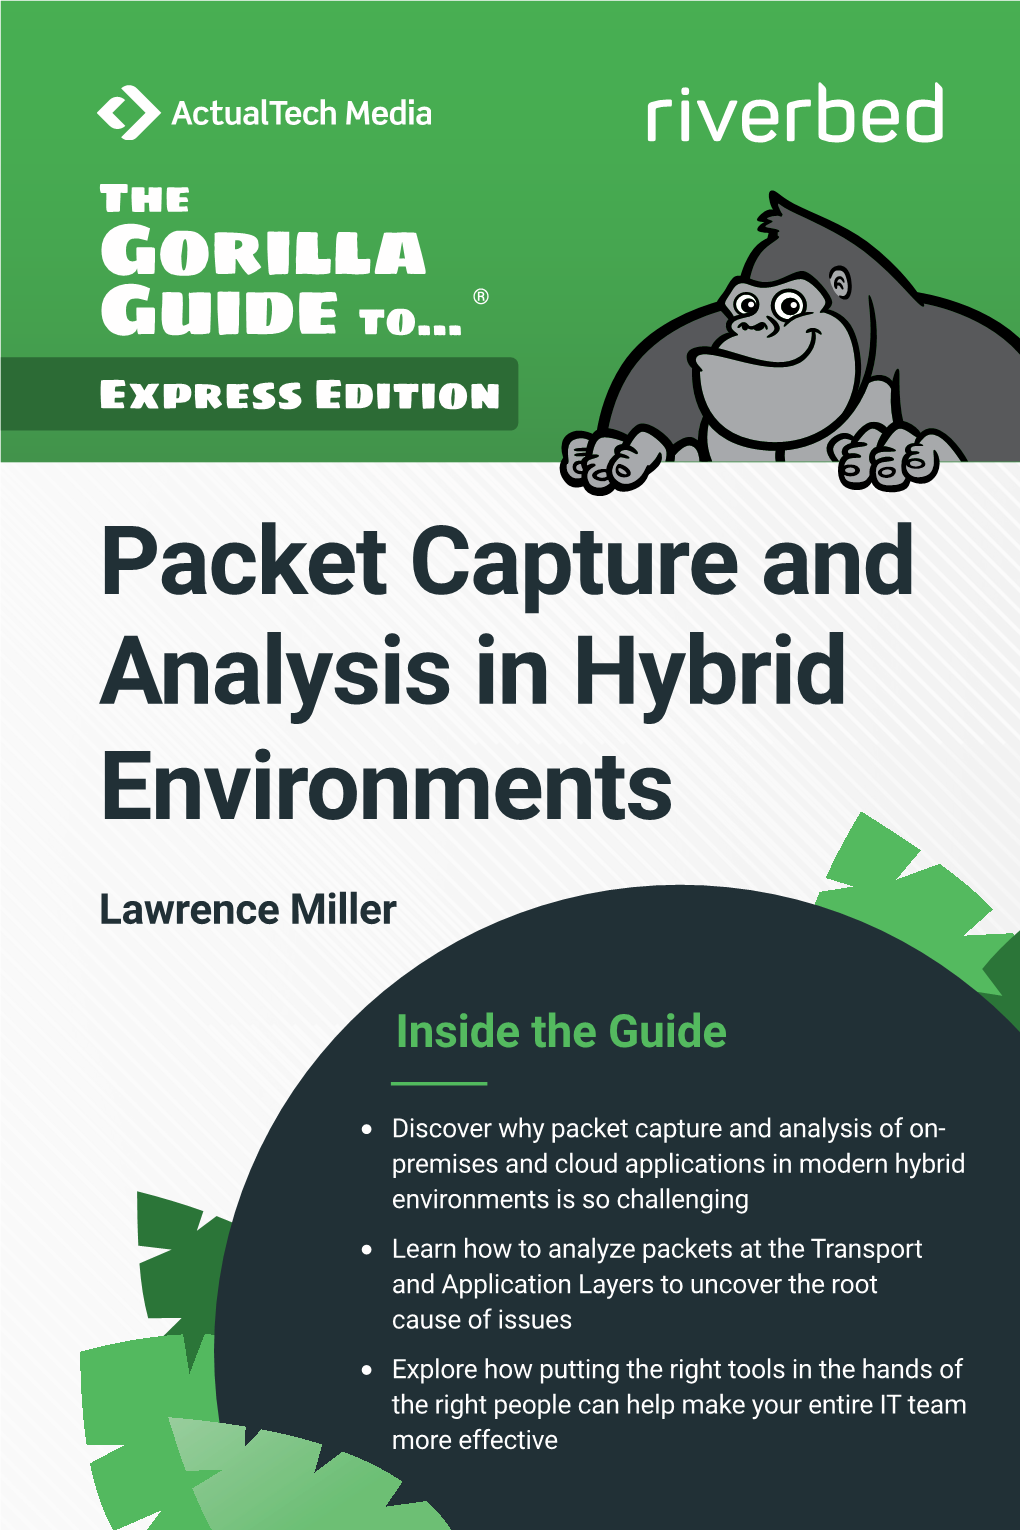 Packet Capture and Analysis in Hybrid Environments